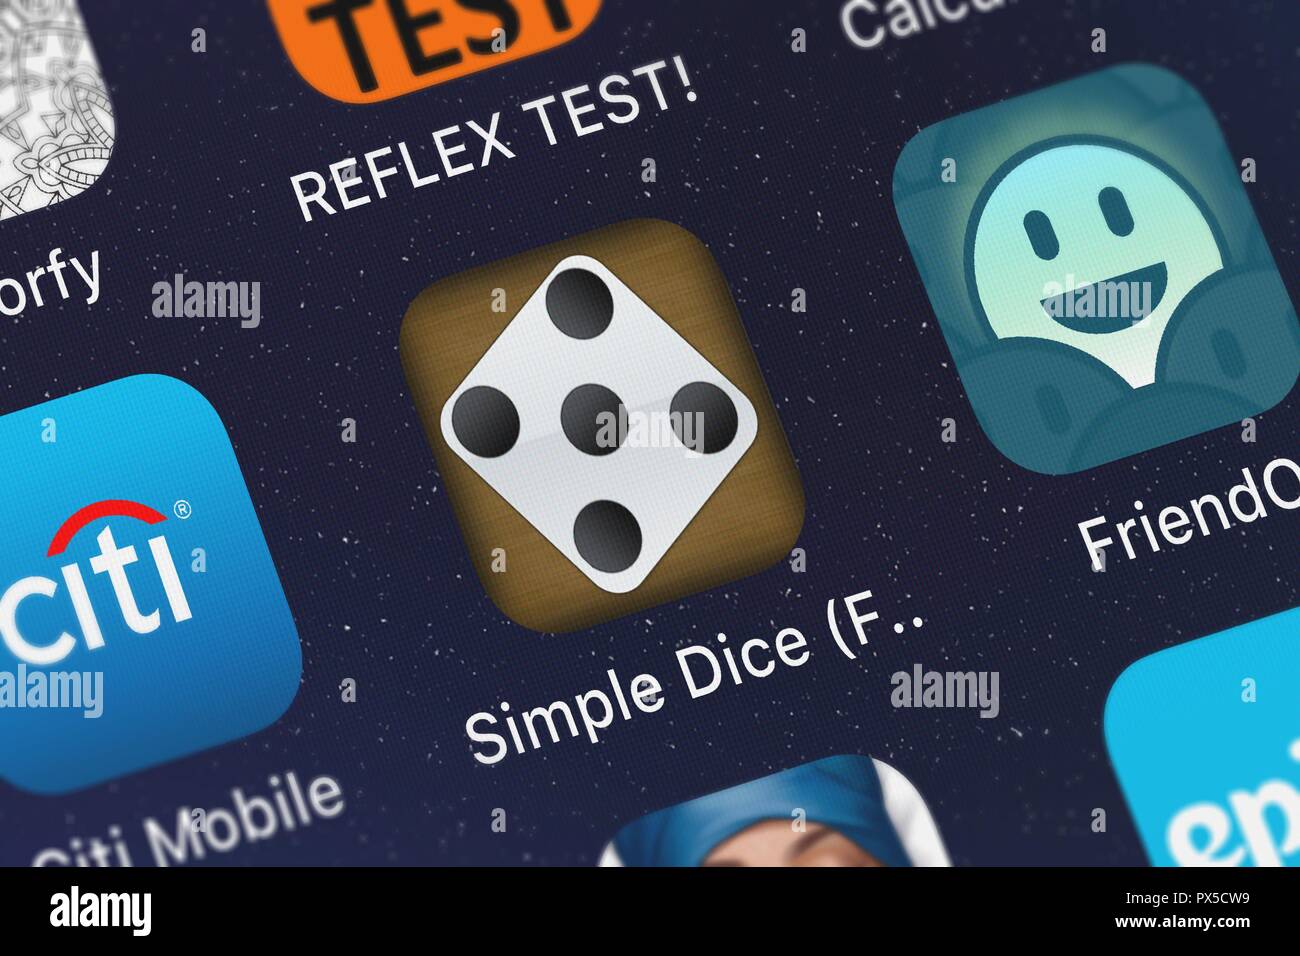 London, United Kingdom - October 19, 2018: Close-up shot of the Simple Dice (FREE) application icon from Ronald Bell on an iPhone. Stock Photo